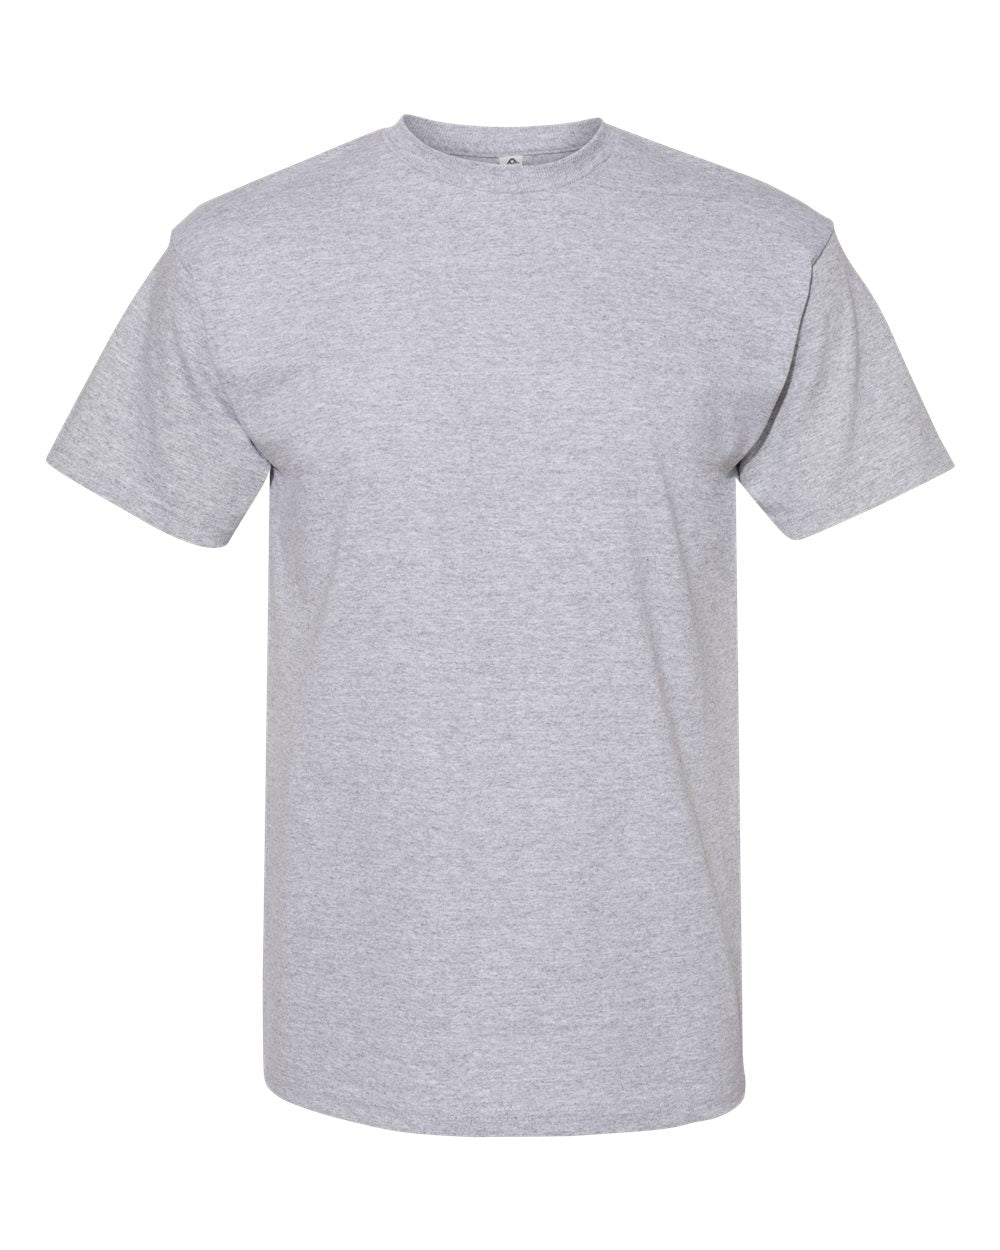 American Apparel Midweight Cotton Unisex Tee 1701 #color_Heather Grey